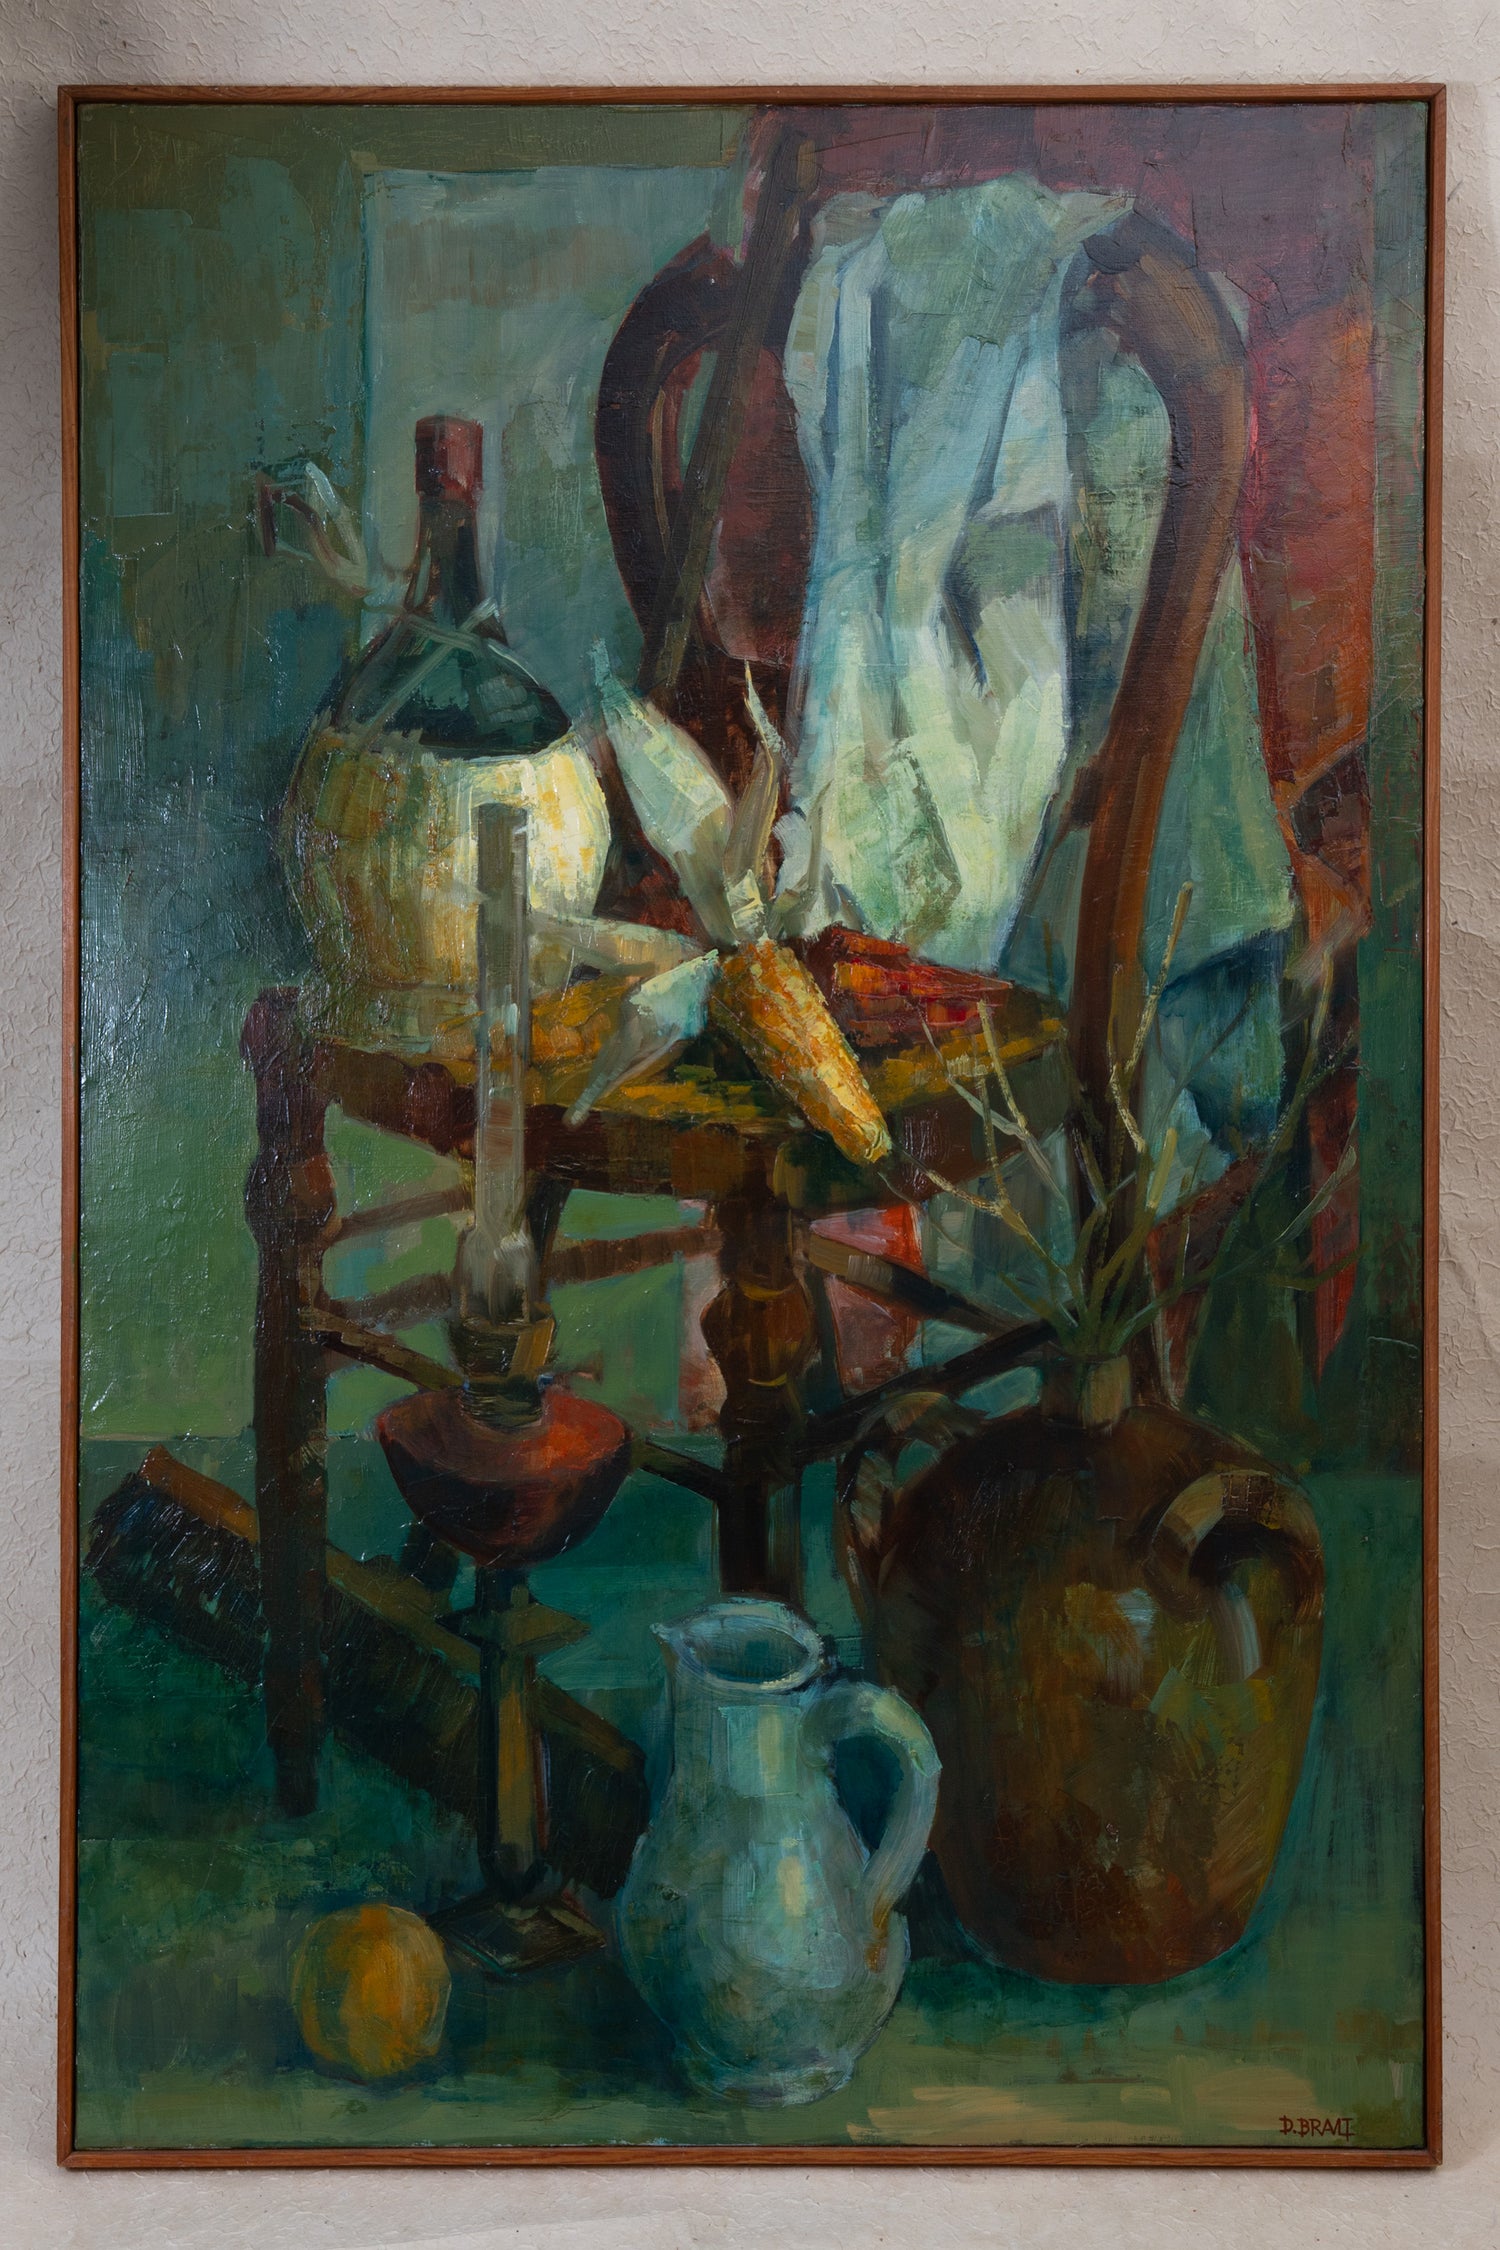 Oil on canvas - Still life with a chair - by Daniel Brault.